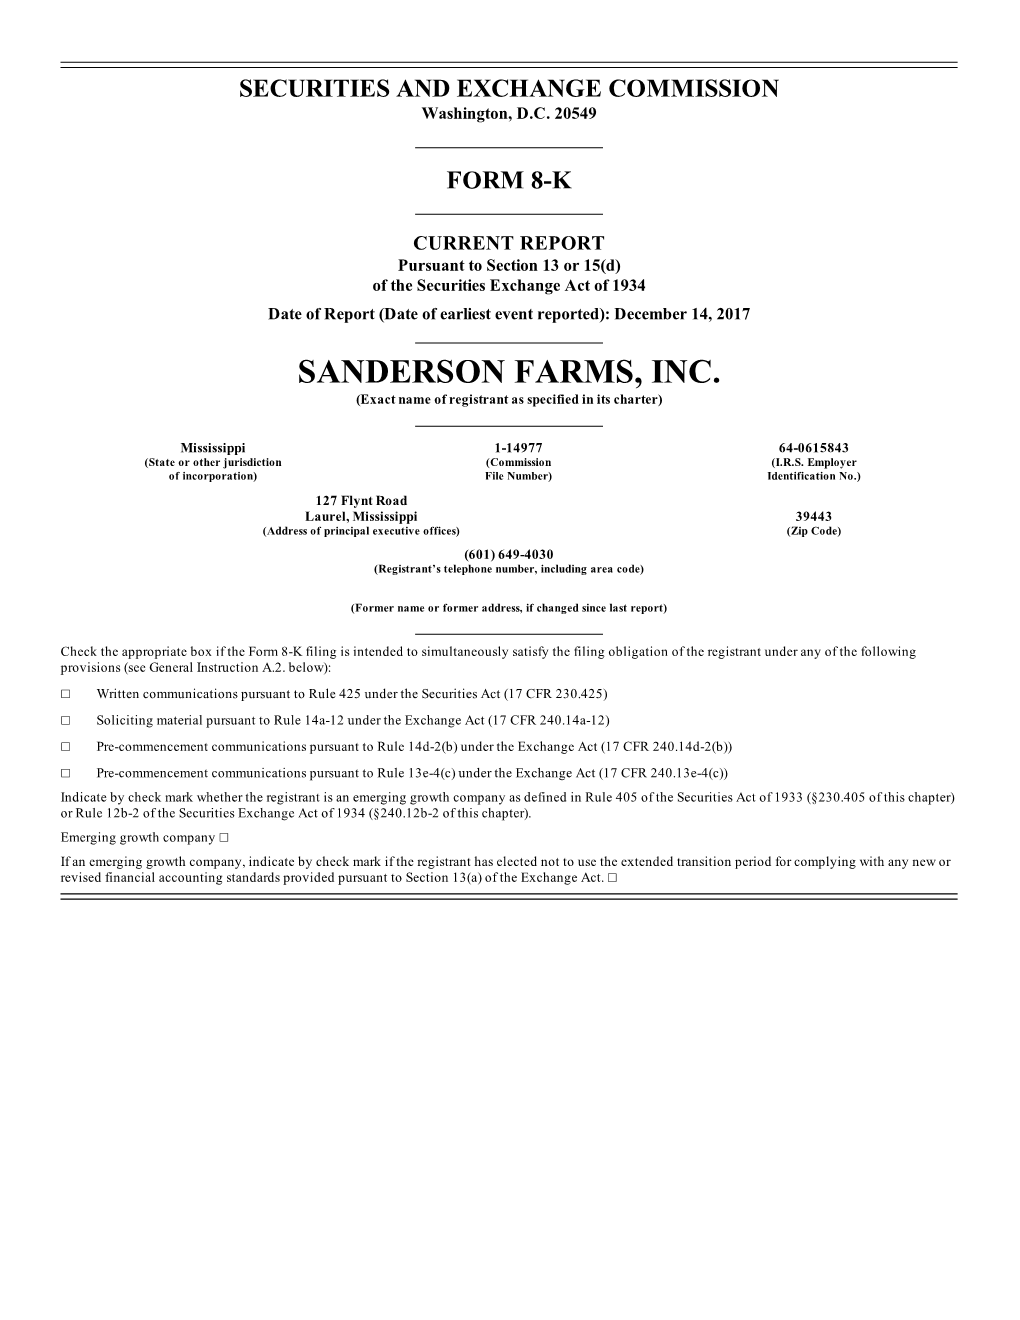 SANDERSON FARMS, INC. (Exact Name of Registrant As Specified in Its Charter)